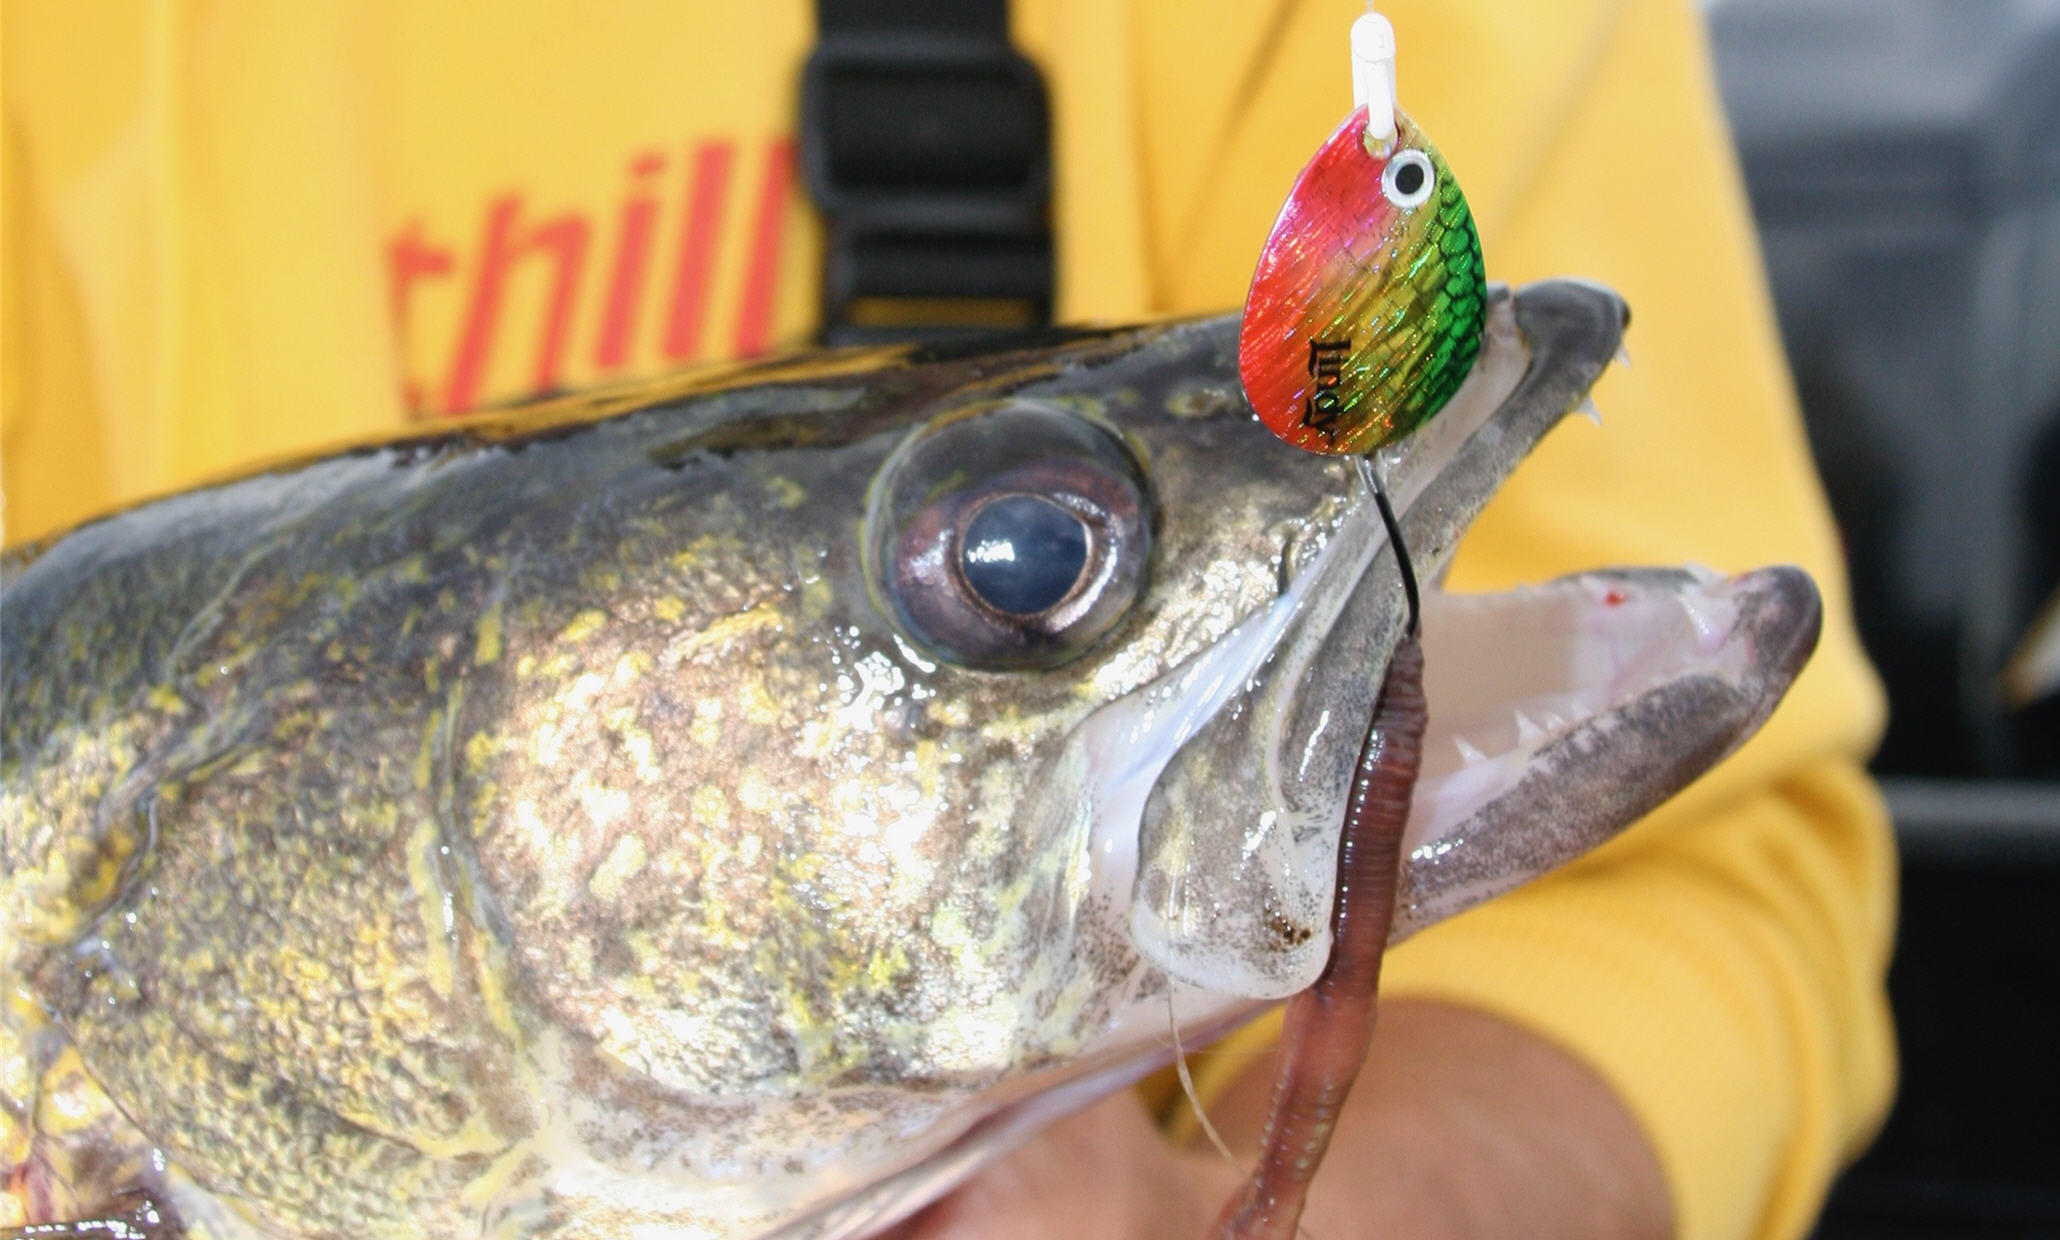 Rig Spinner Trout, Spinner Walleye Lure